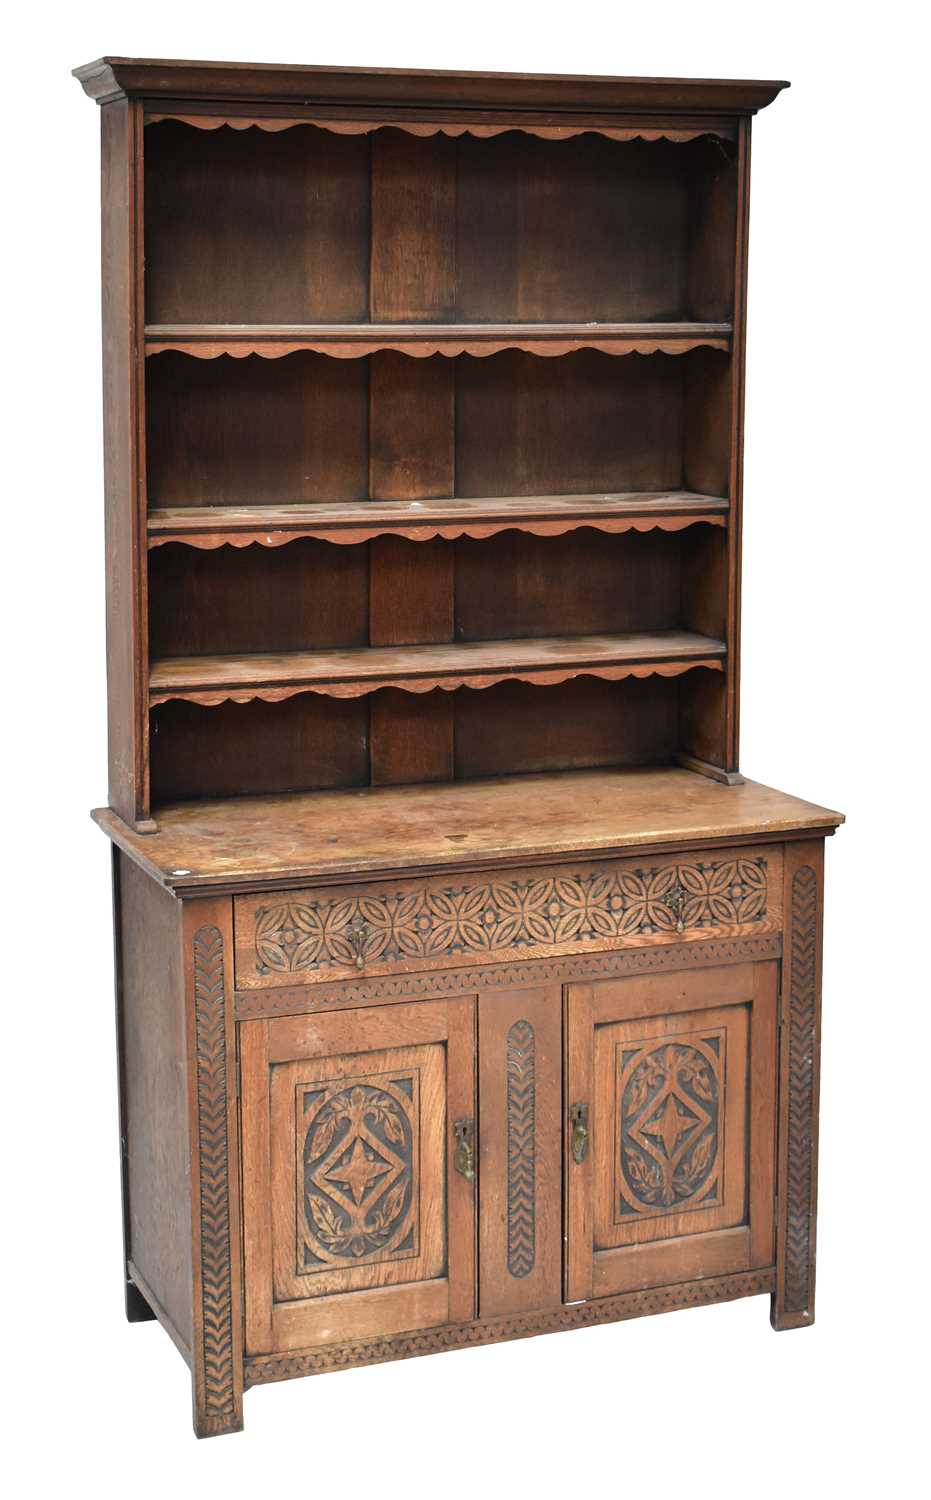 An early 20th century carved oak dresser with enclosed plate rack of three shelves, above a base